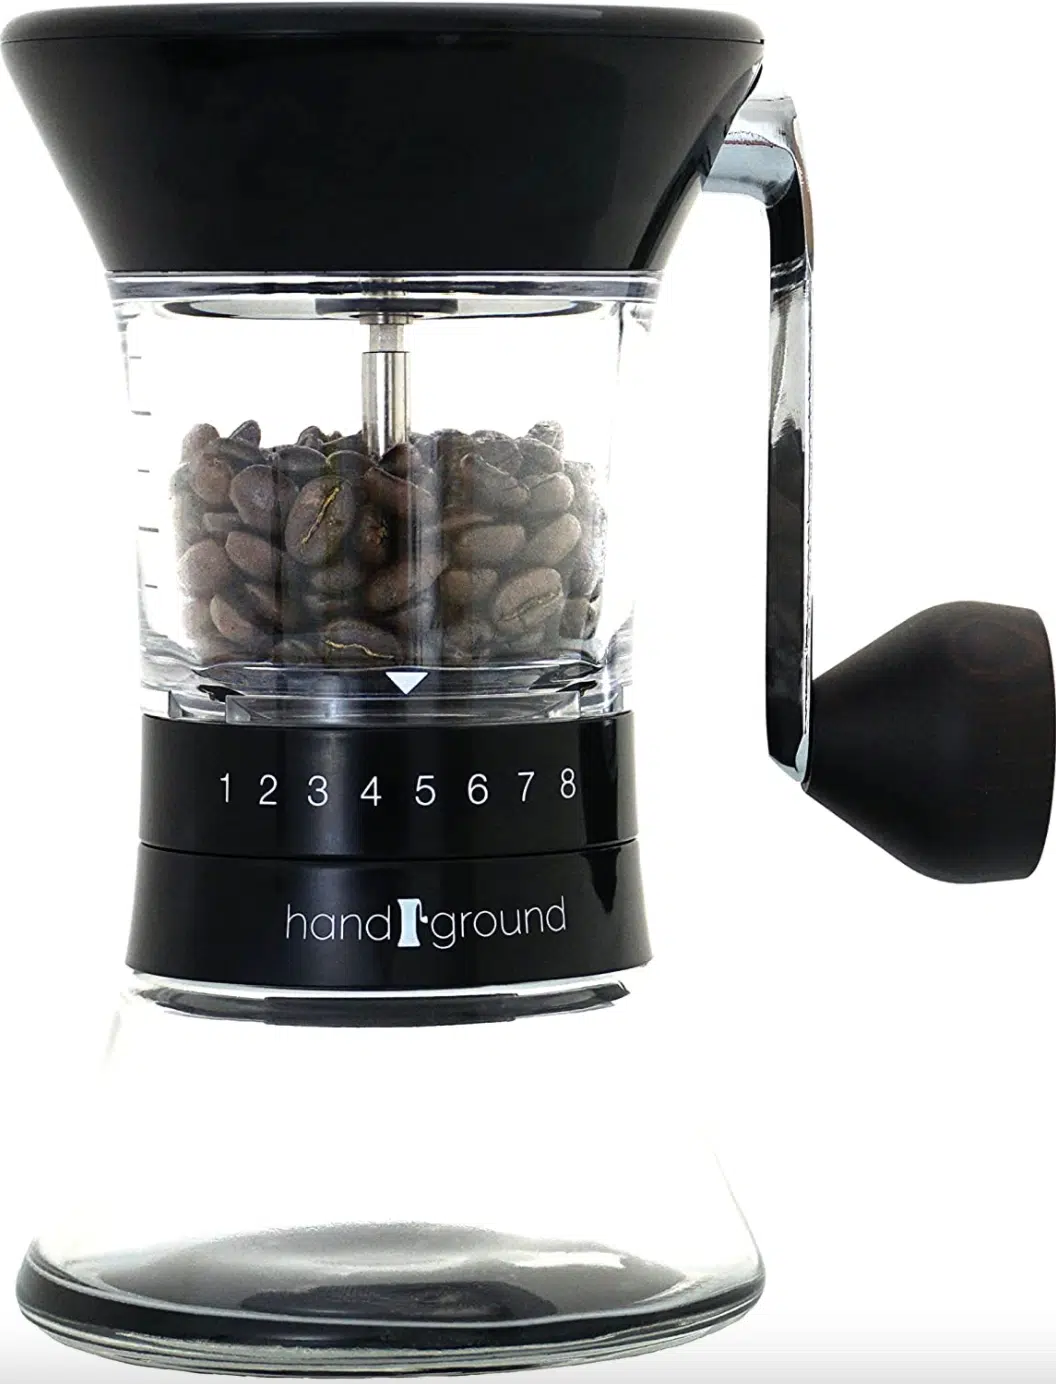 5 Best Coffee Grinders for Pour Over Brewing ☕️ (Auto & Manual)